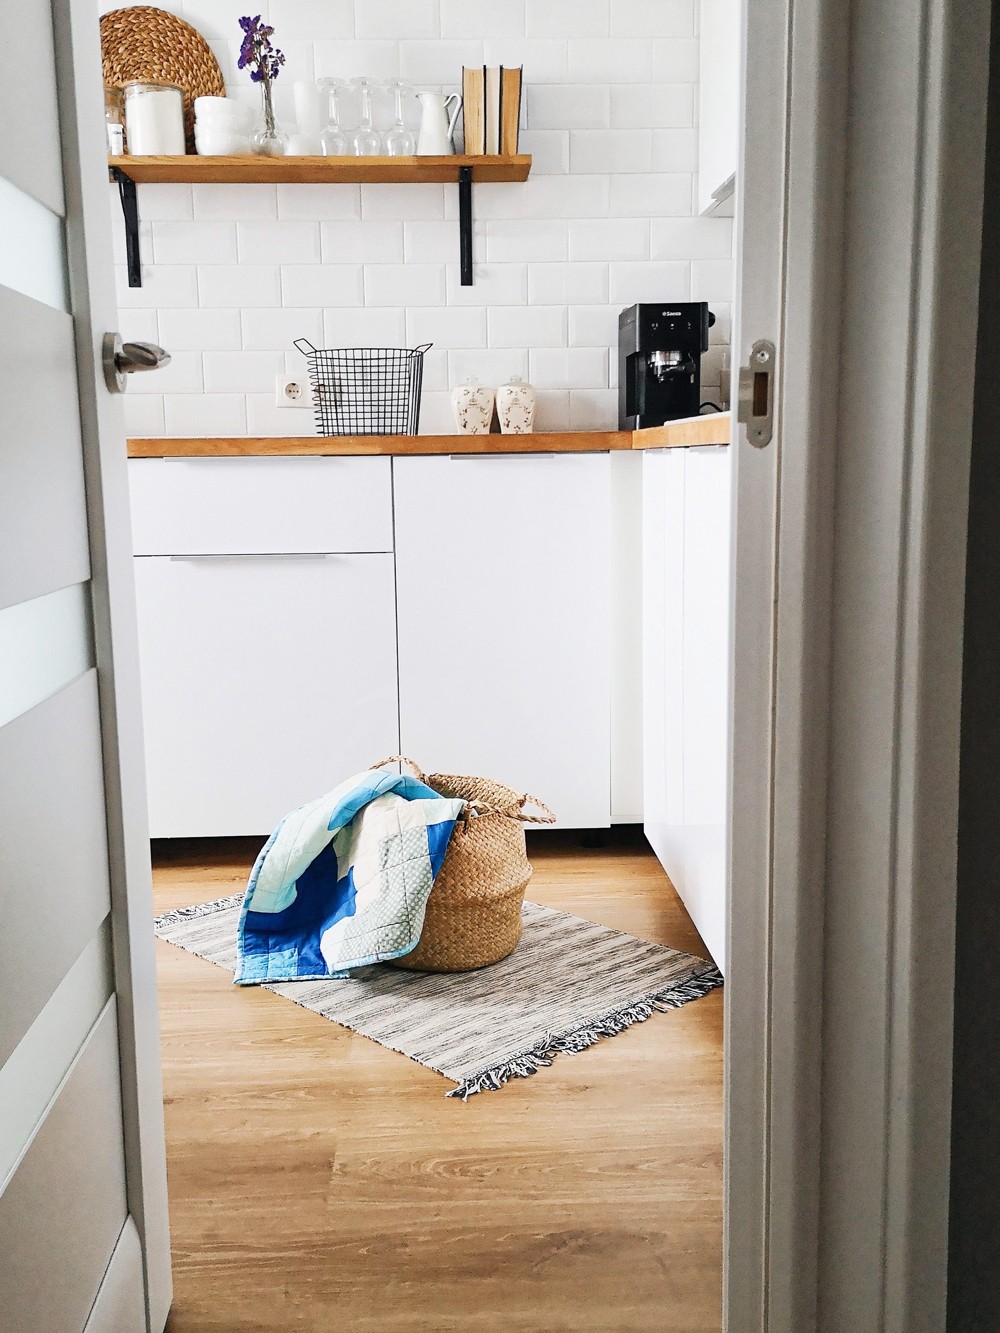 A white walk-in pantry contains storage space, open-shelving and some kitchen appliances